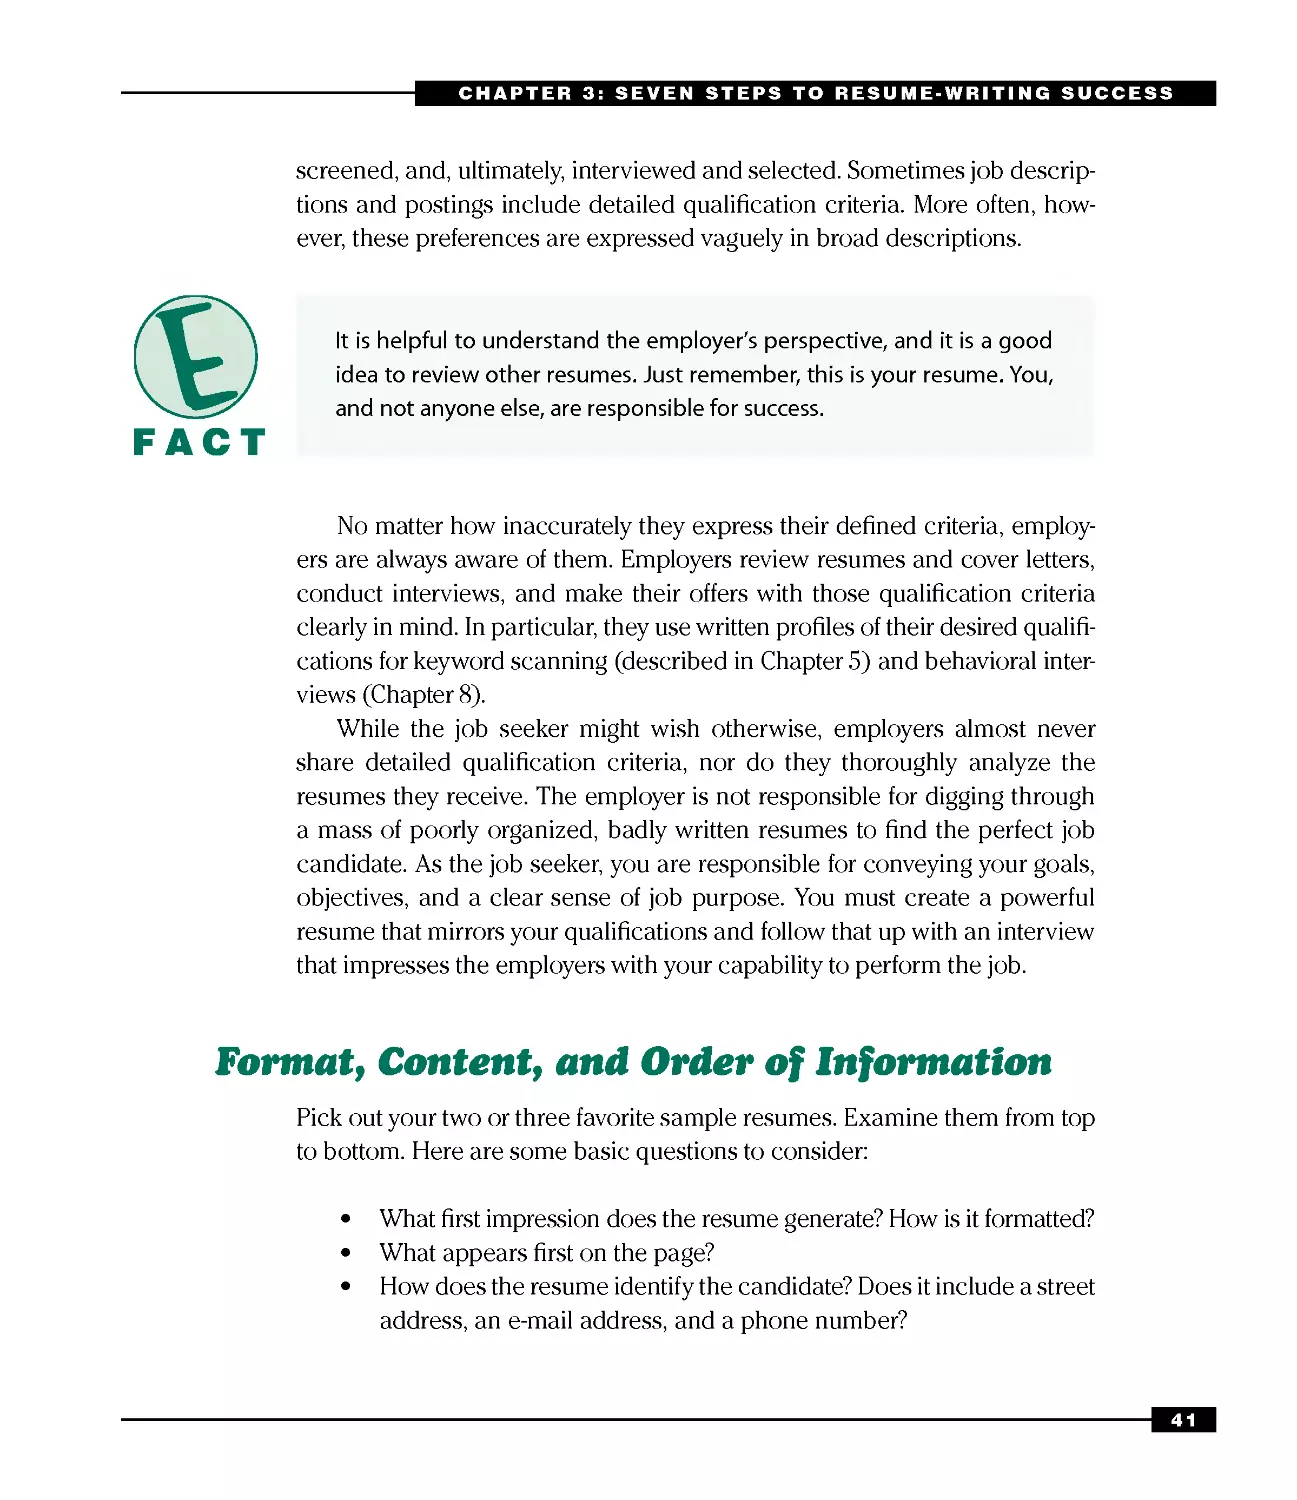 Format, Content, and Order of Information